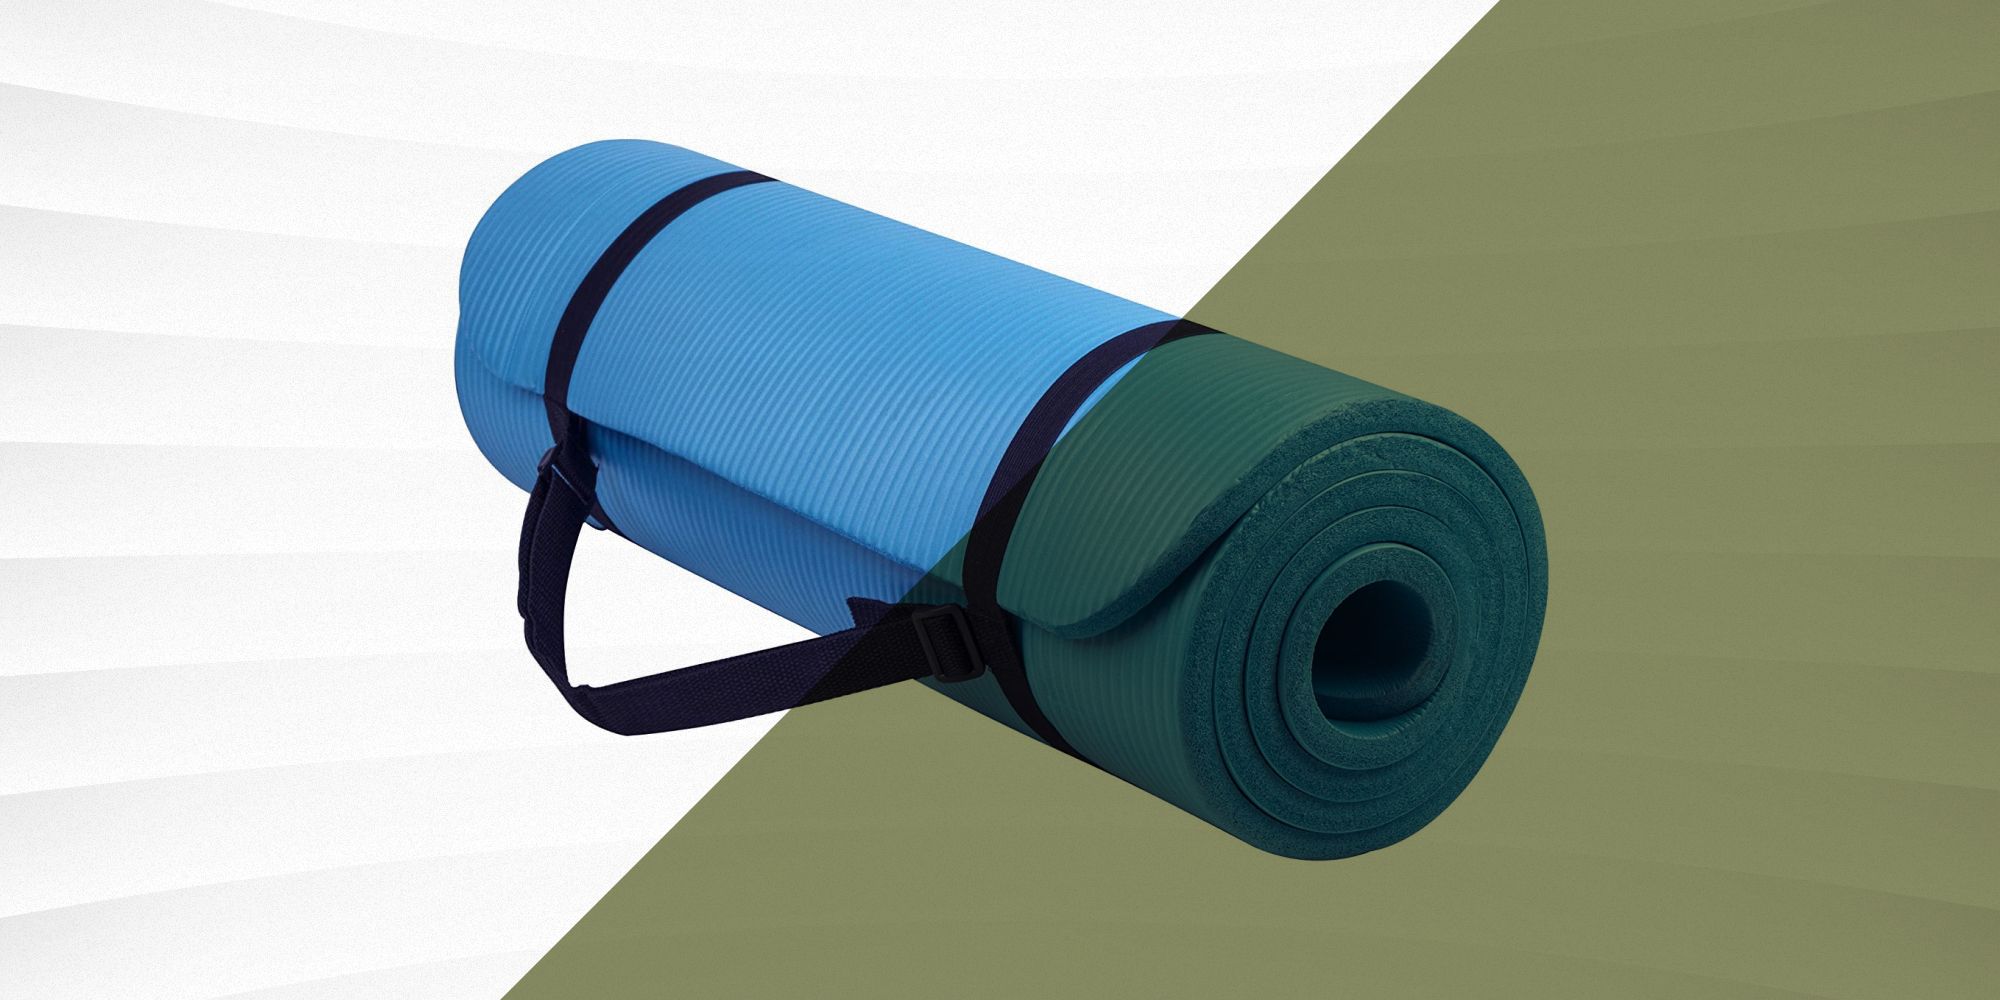 OGOGO Yoga Mat Double-Sided Non Slip,Eco Friendly Exercise Yoga Mat for Men and Women,Thick High Density Pro Mat with Carrying Strap 